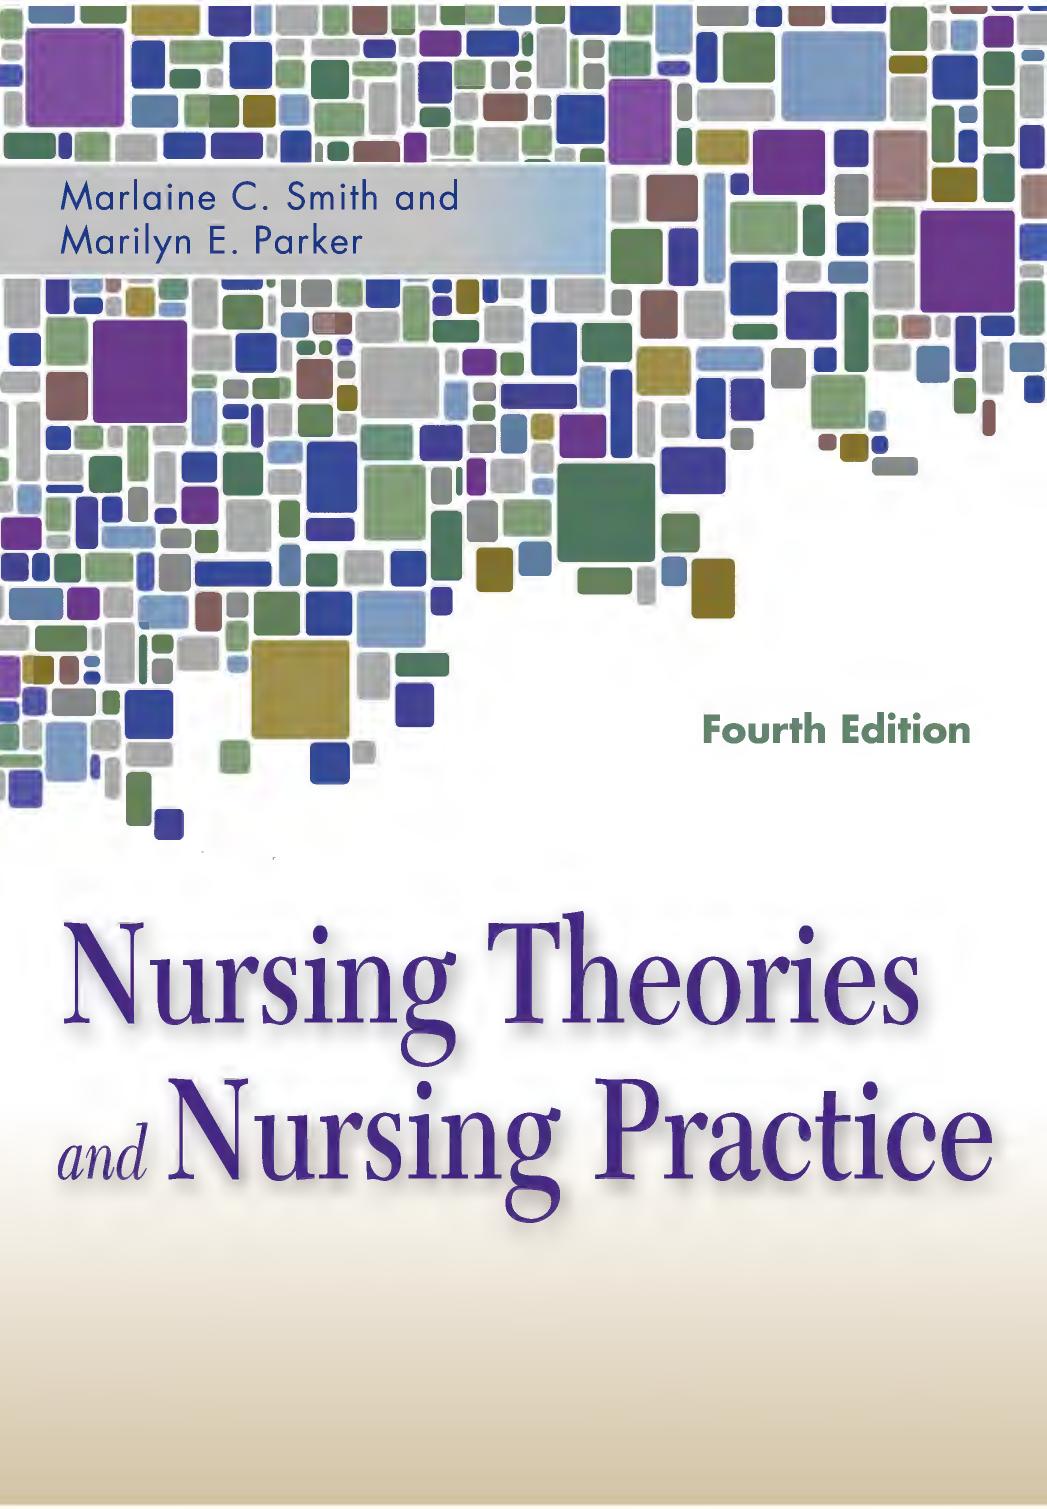 (eBook PDF)Nursing Theories and Nursing Practice, 4th Edition by Marlaine Smith,Marilyn Parker